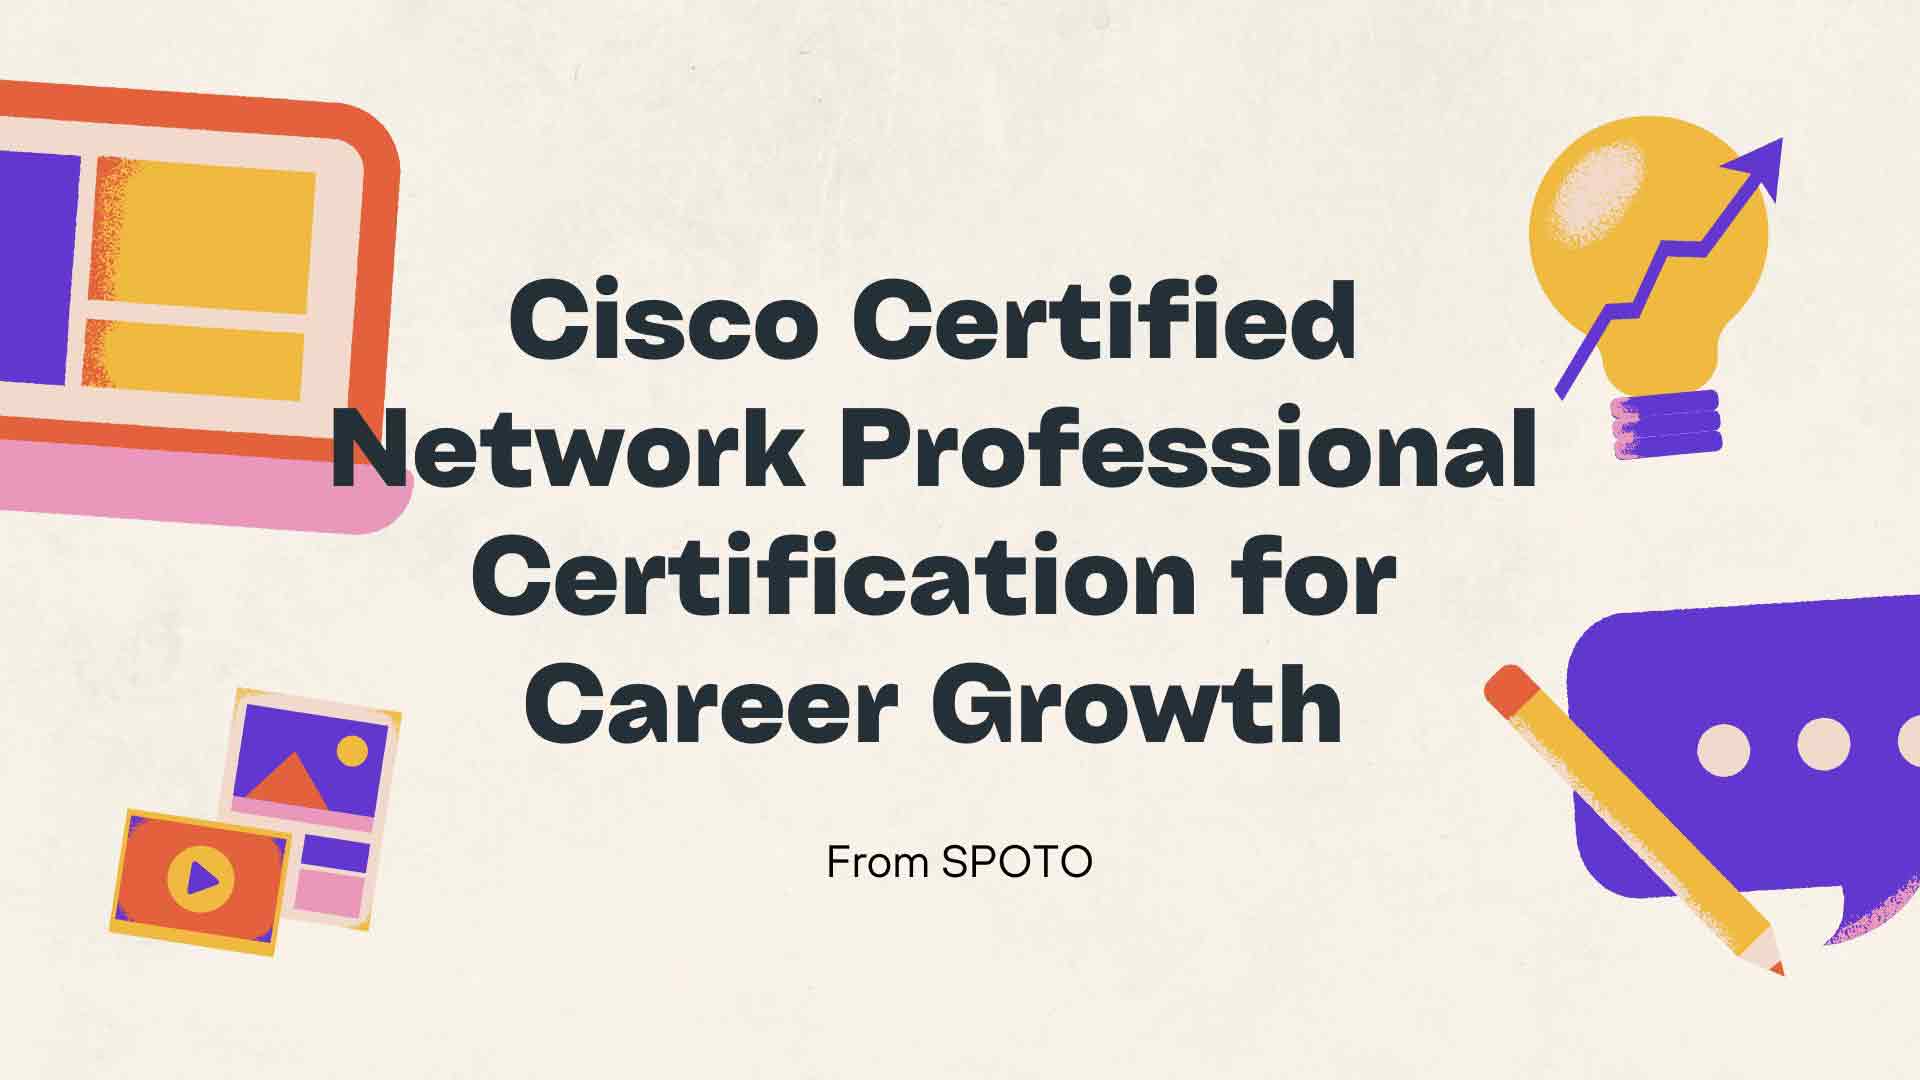 Cisco Certified Network Professional Certification for Career Growth